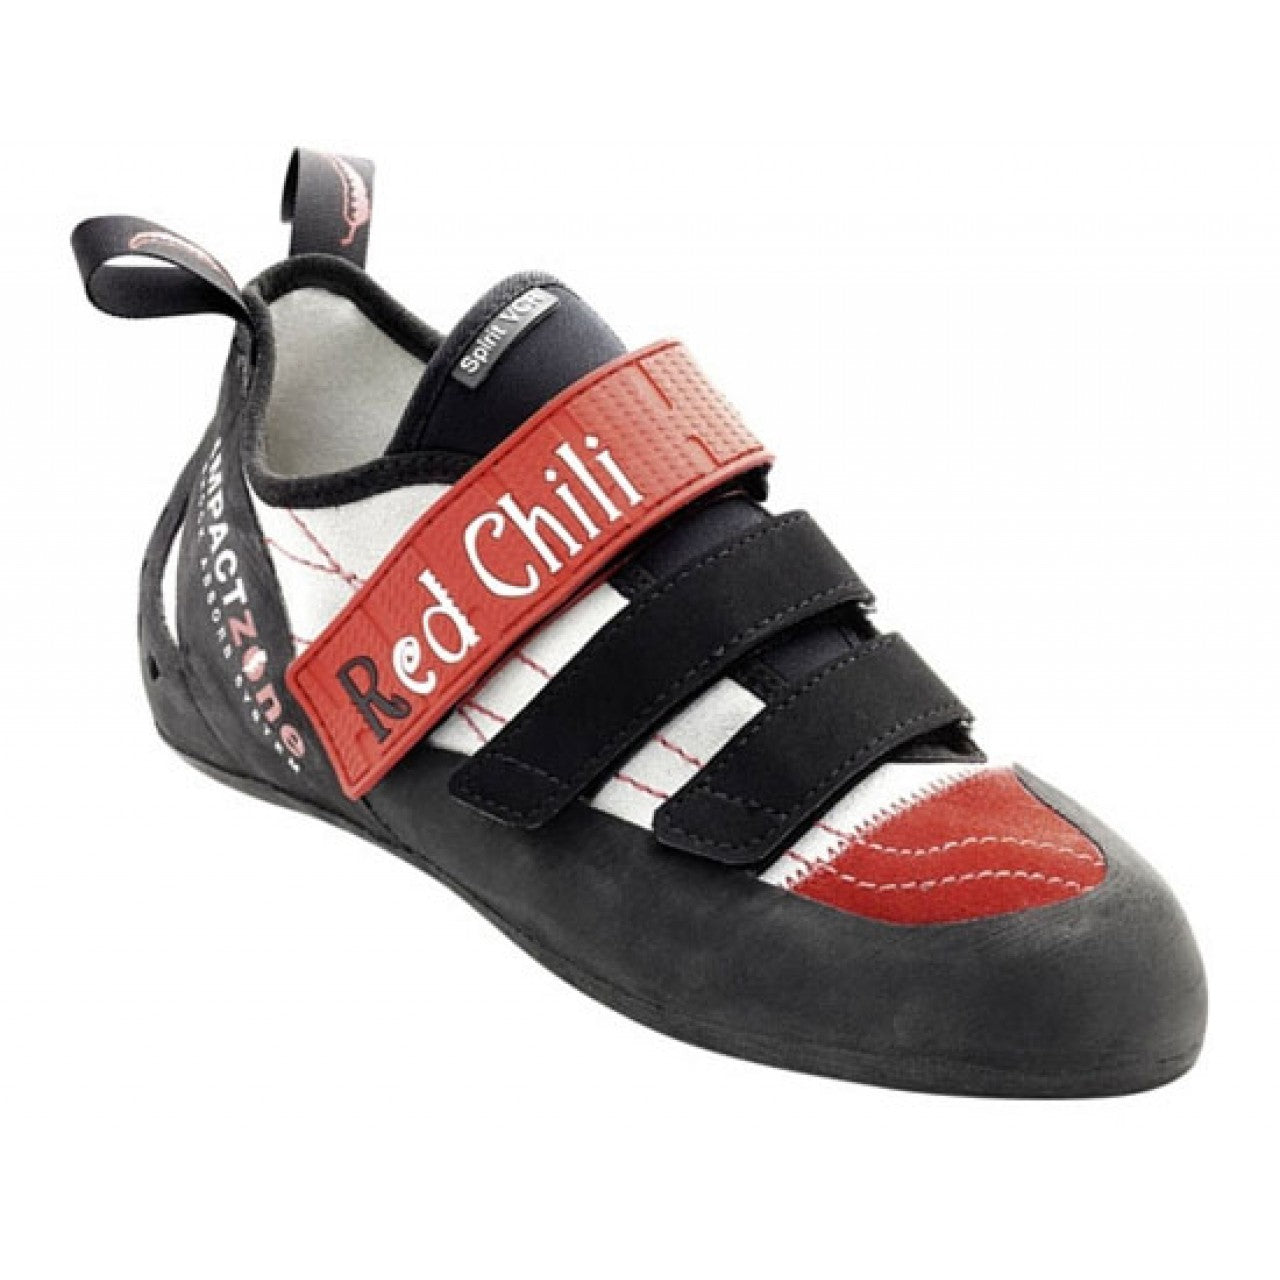 red chilli rock shoes